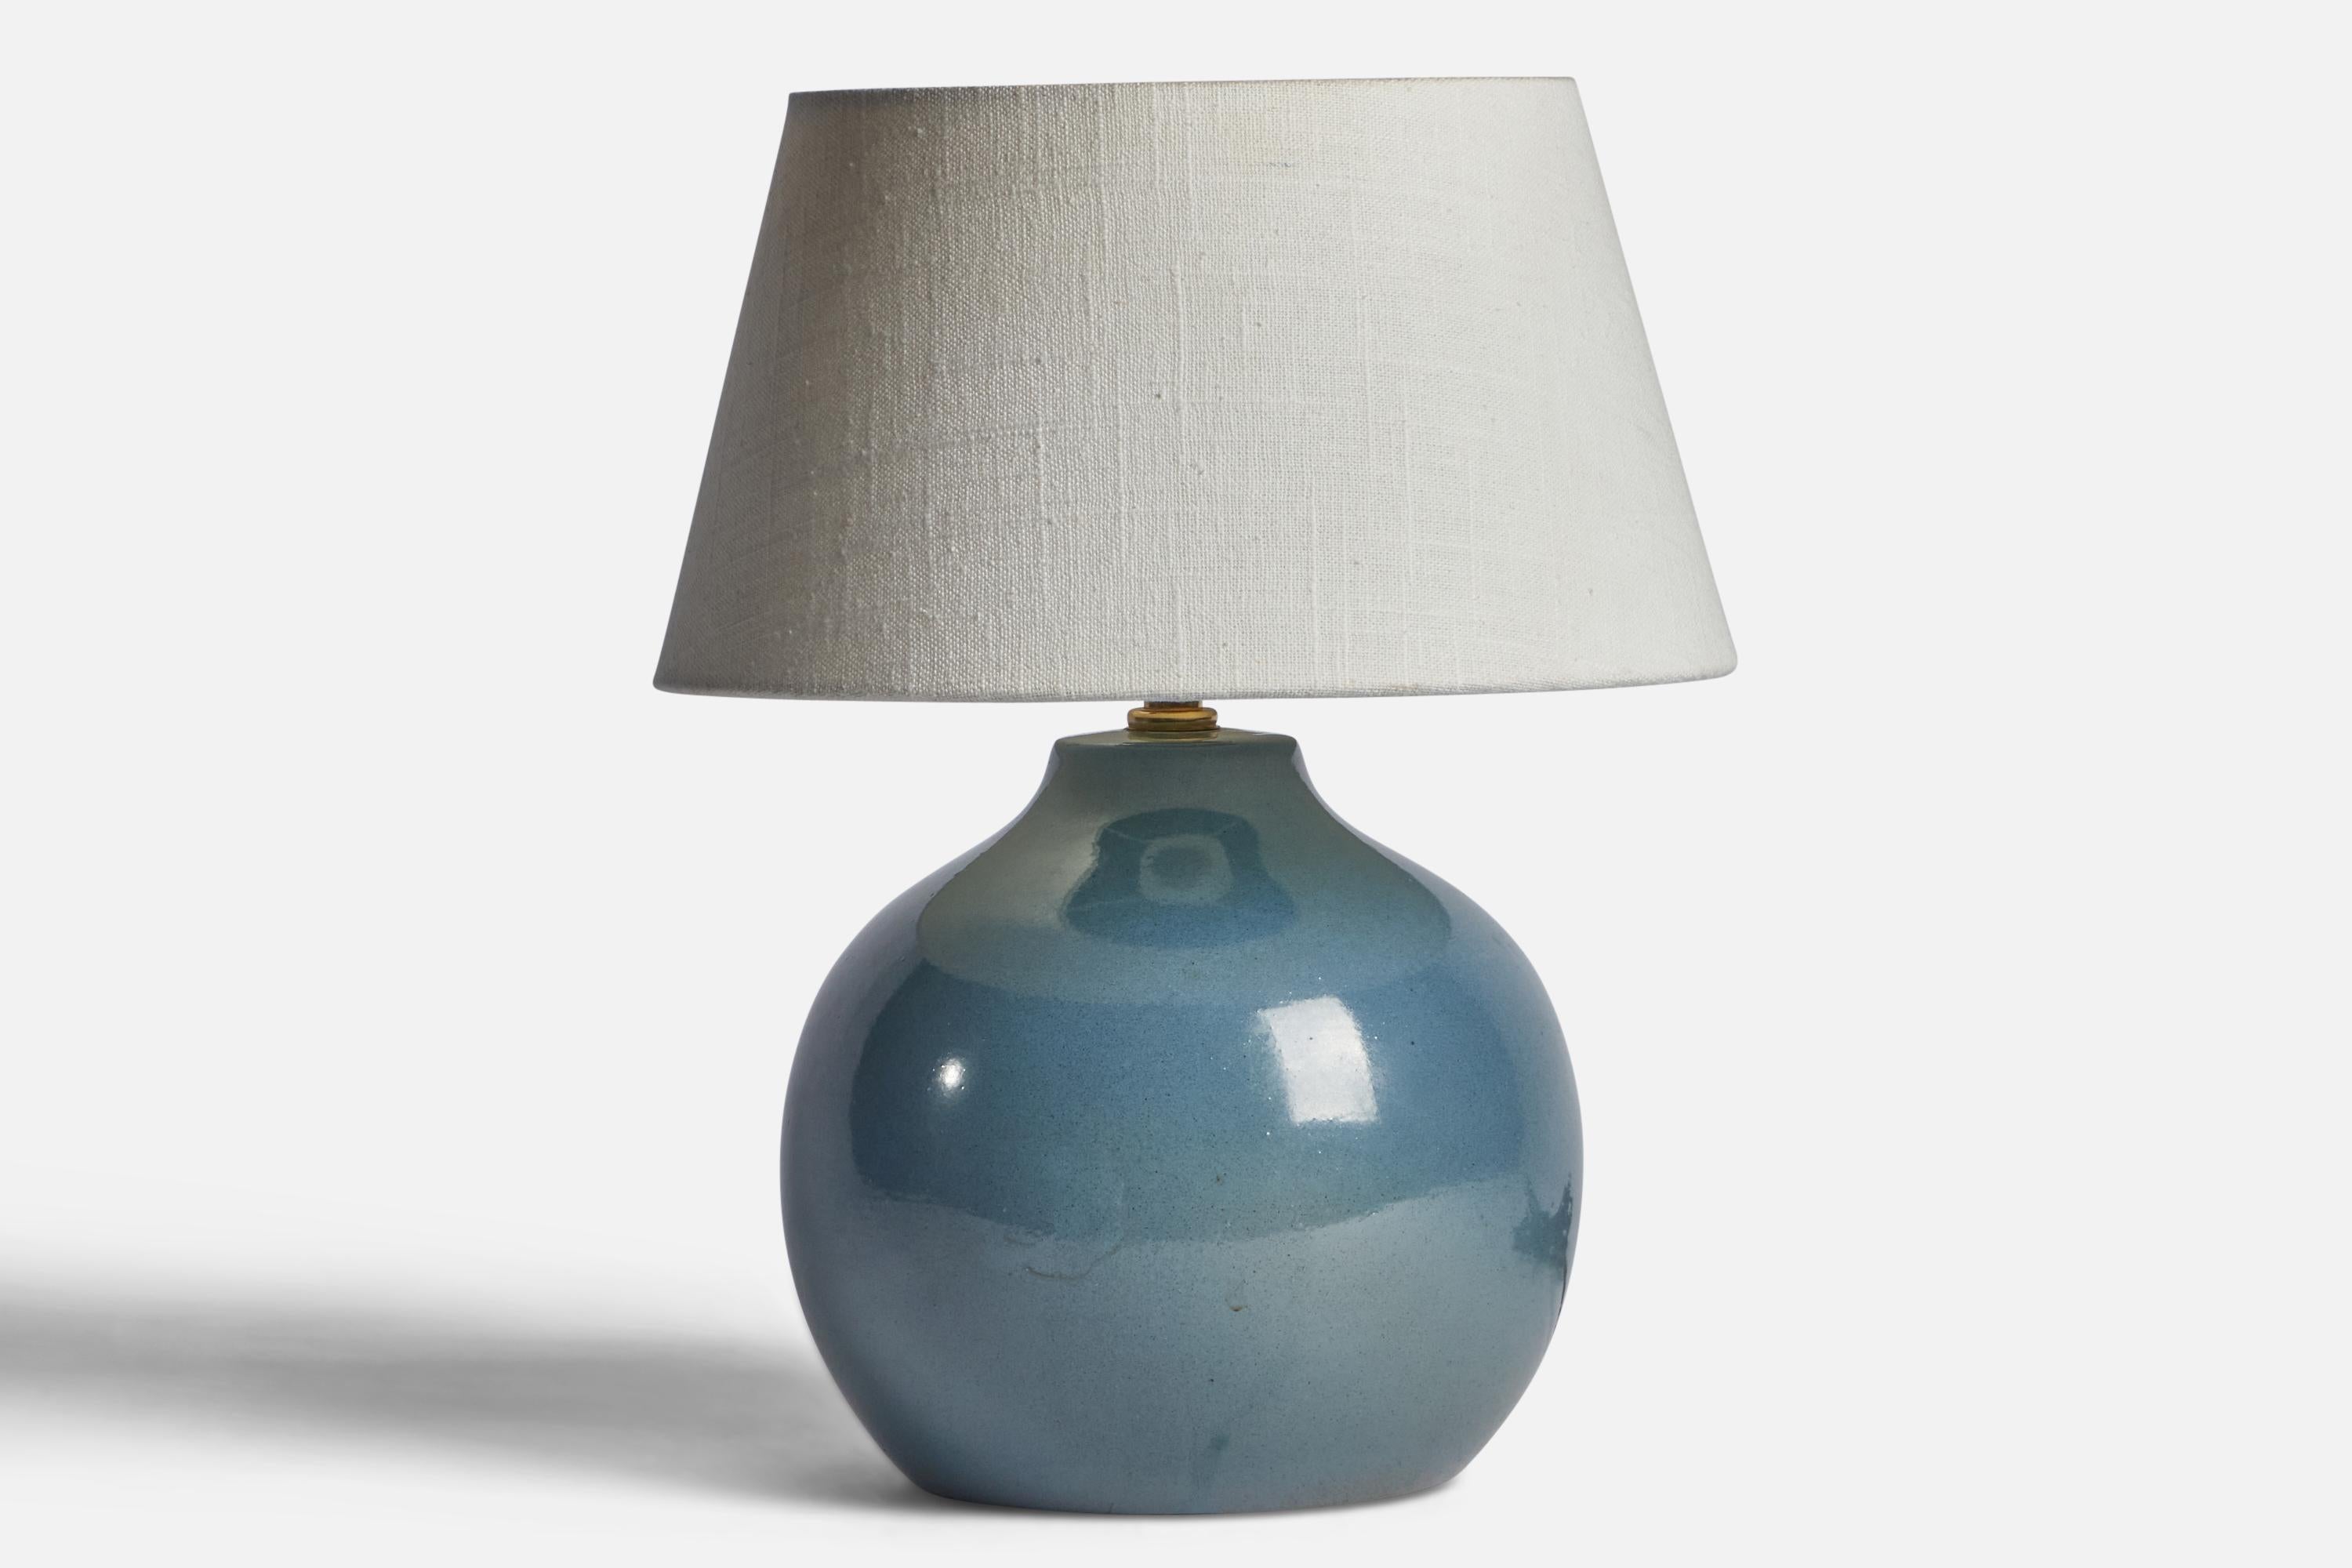 A blue-glazed ceramic table lamp designed by Jane & Gordon Martz and produced by Marshall Studios, USA, 1960s.

Dimensions of Lamp (inches): 9.85” H x 7.3” Diameter
Dimensions of Shade (inches): 7” Top Diameter x 10” Bottom Diameter x 5.5” H